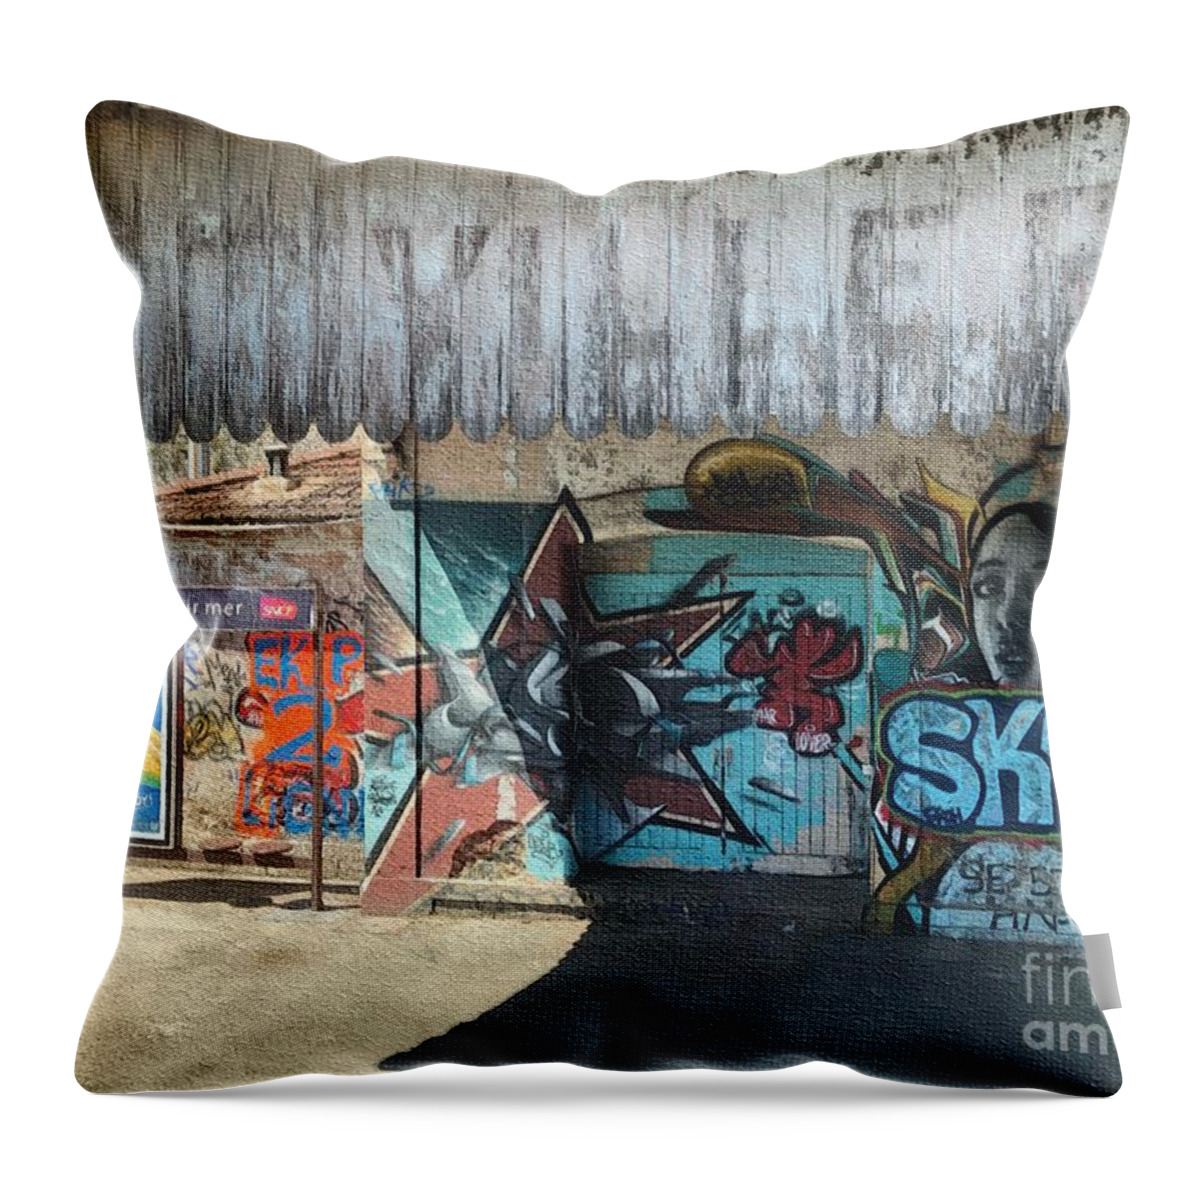 Train Station Throw Pillow featuring the digital art Passing Villefranche sur mer by Diana Rajala